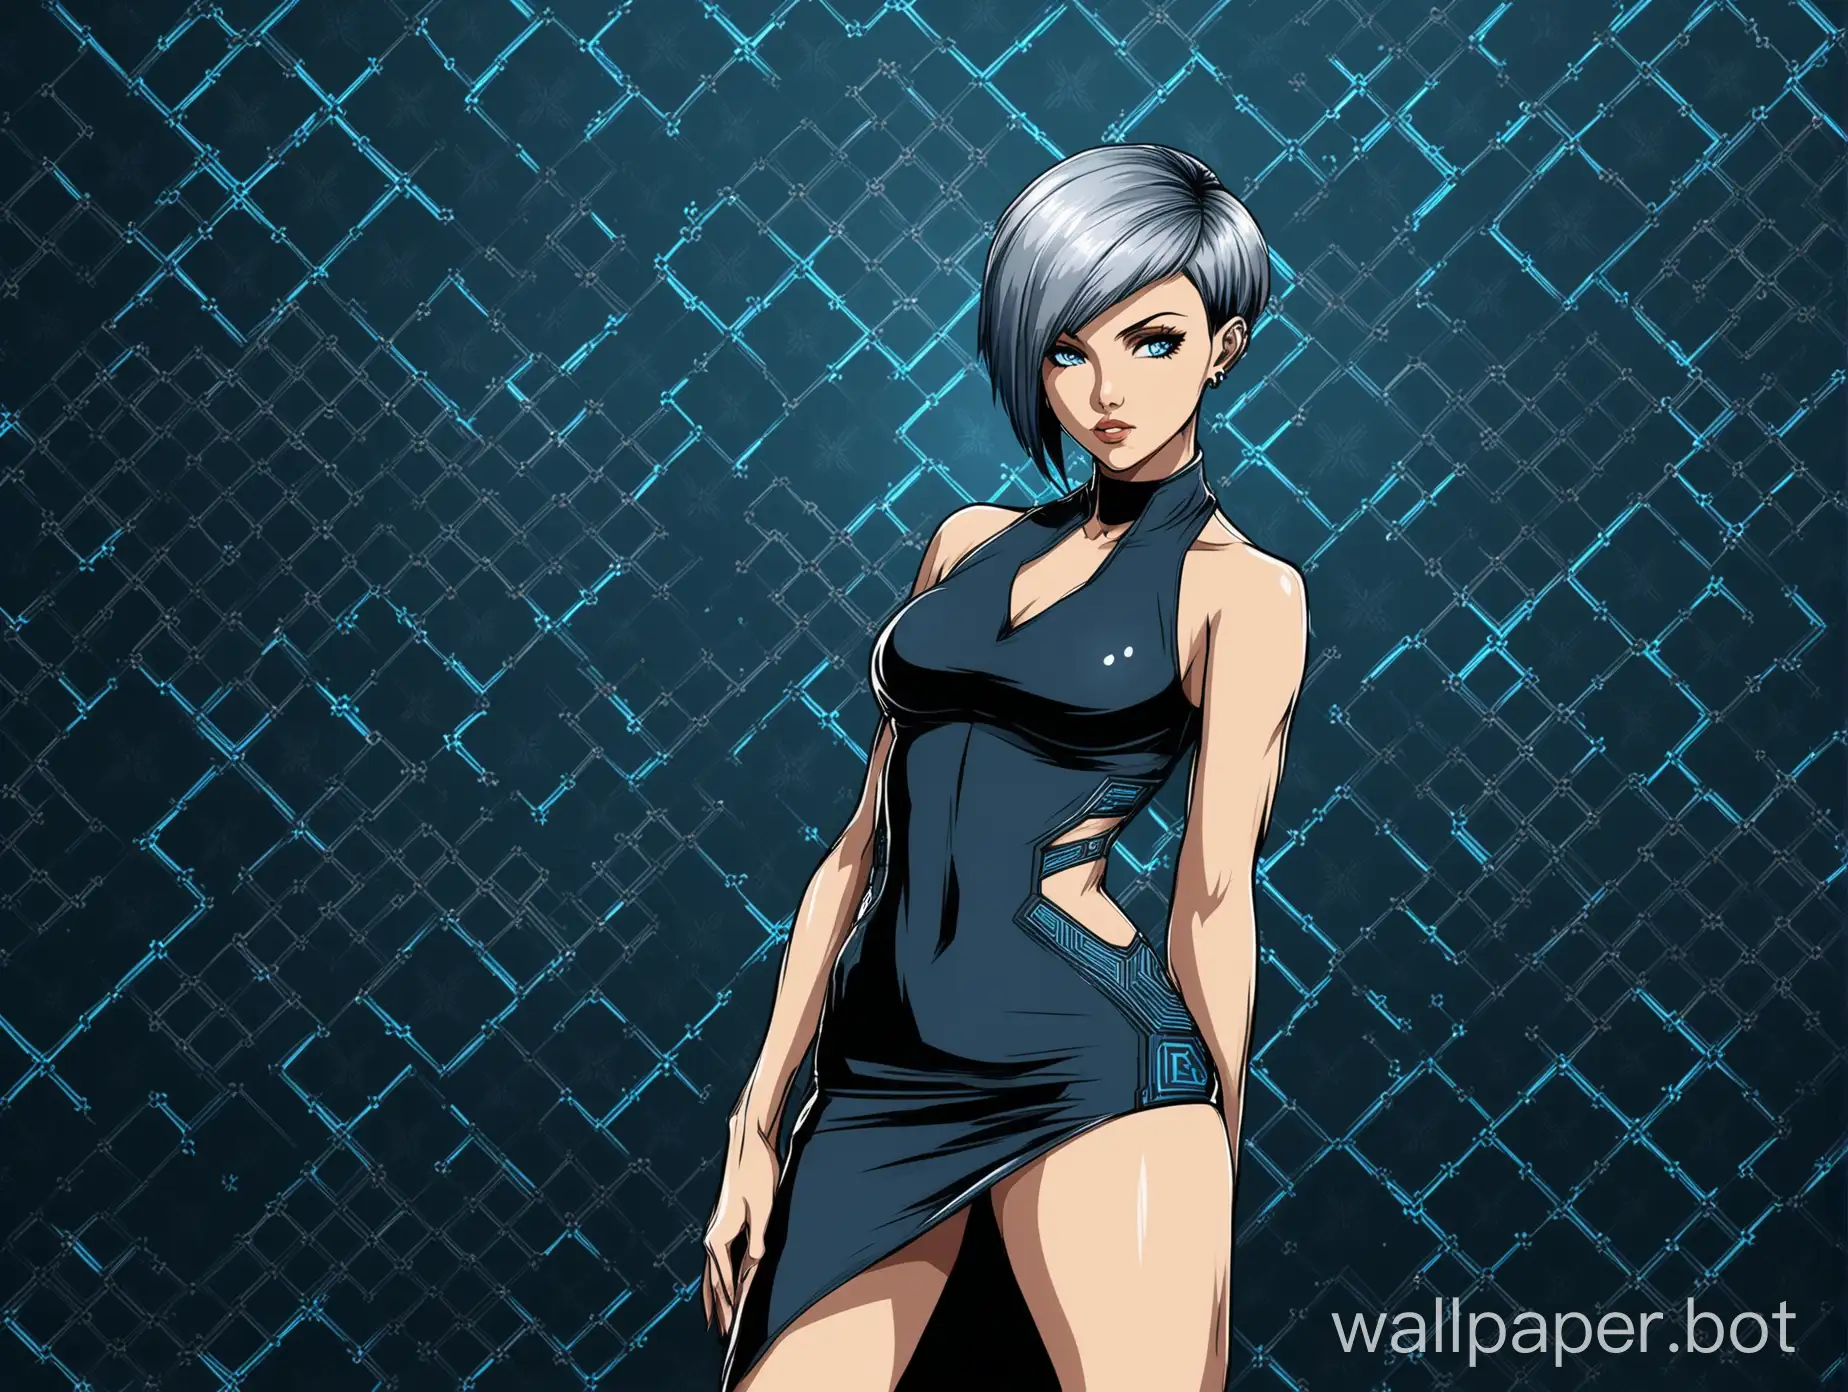 Design a captivating wallpaper featuring a sultry anime female character with a short blue hairstyle similar to Ruby Rose's character in 'XXX Return of Xander Cage'.Her blue short hairstyle should be vibrant and electric
The character should exude confidence and charisma, with a seductive yet edgy look that reflects her personality. Her silver short hairstyle should be sleek and modern, adding to her bold and dynamic appearance. Dress her in a fitted  crop top that accentuates her curvy physique, paired with a sleek bodycon skirt that hugs her figure. Enhance her sexiness with subtle yet alluring poses and expressions. Incorporate elements of Arch Linux, such as the logo or color scheme, into the background or accessories to give the wallpaper a tech-inspired edge. The background should be monochromatic, clean, and mineralistic, with subtle textures to add depth and interest while maintaining a minimalist aesthetic